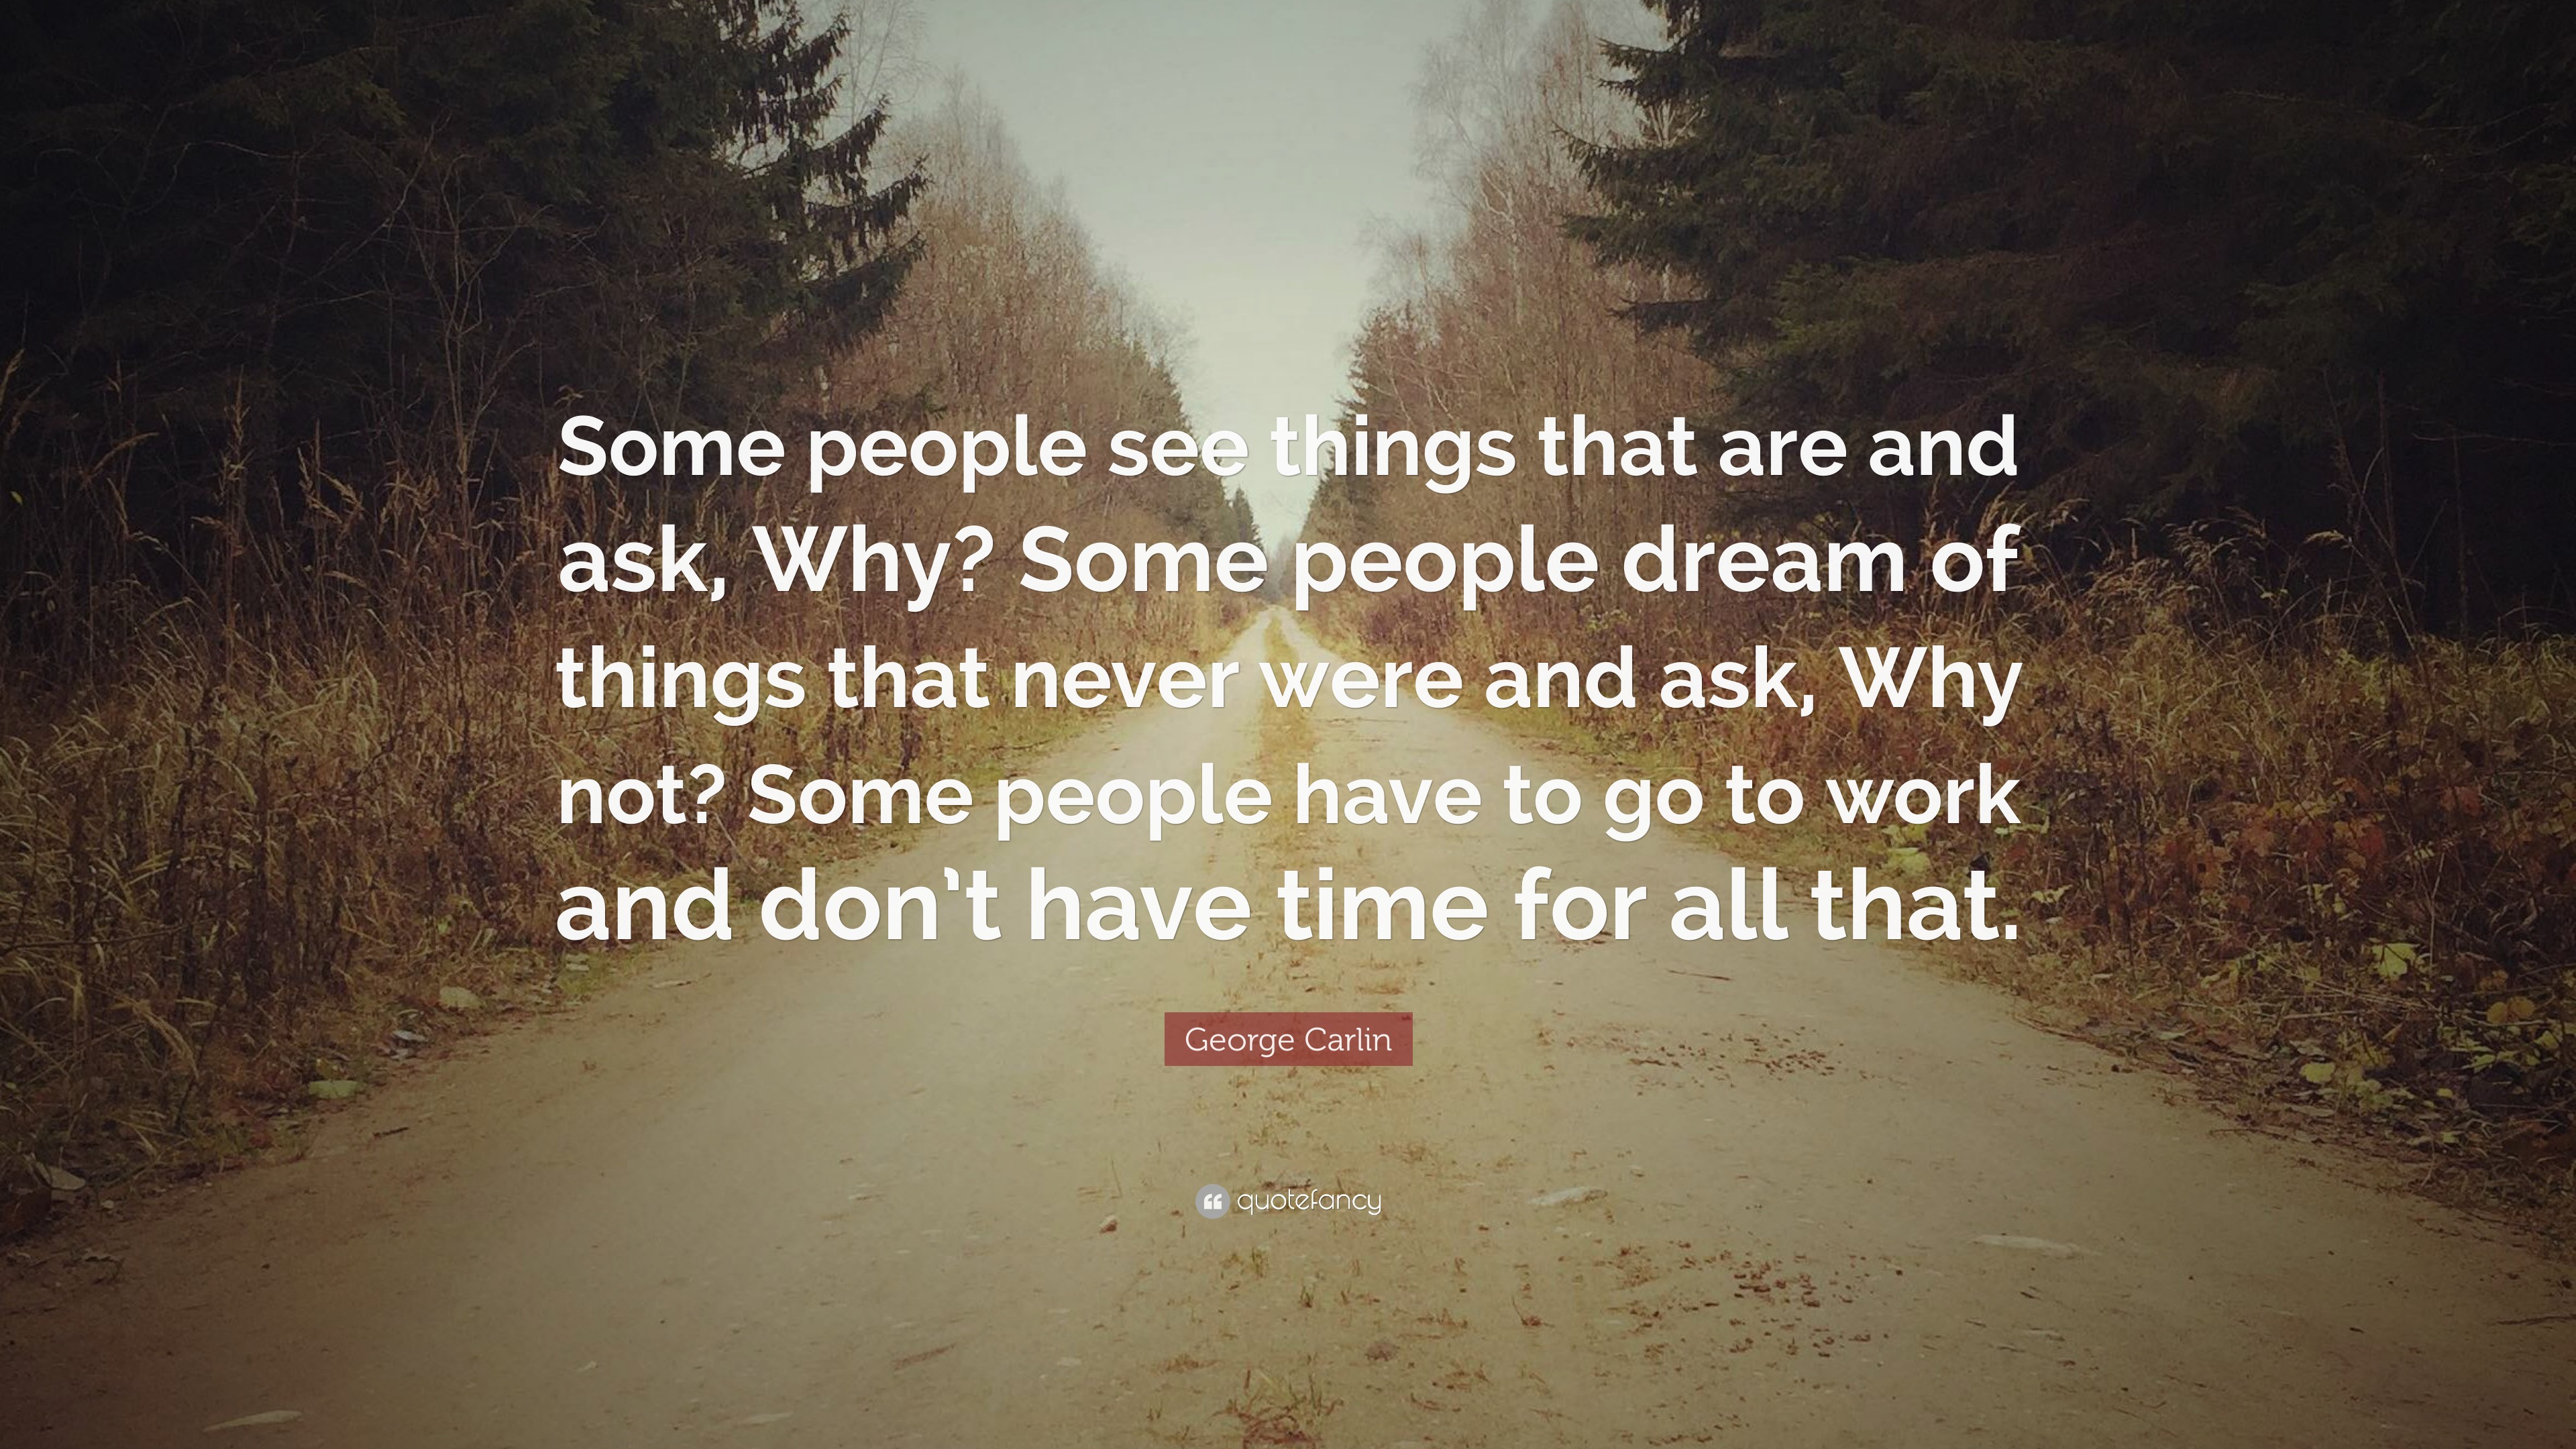 George Carlin Quote: “Some people see things that are and ask, Why ...